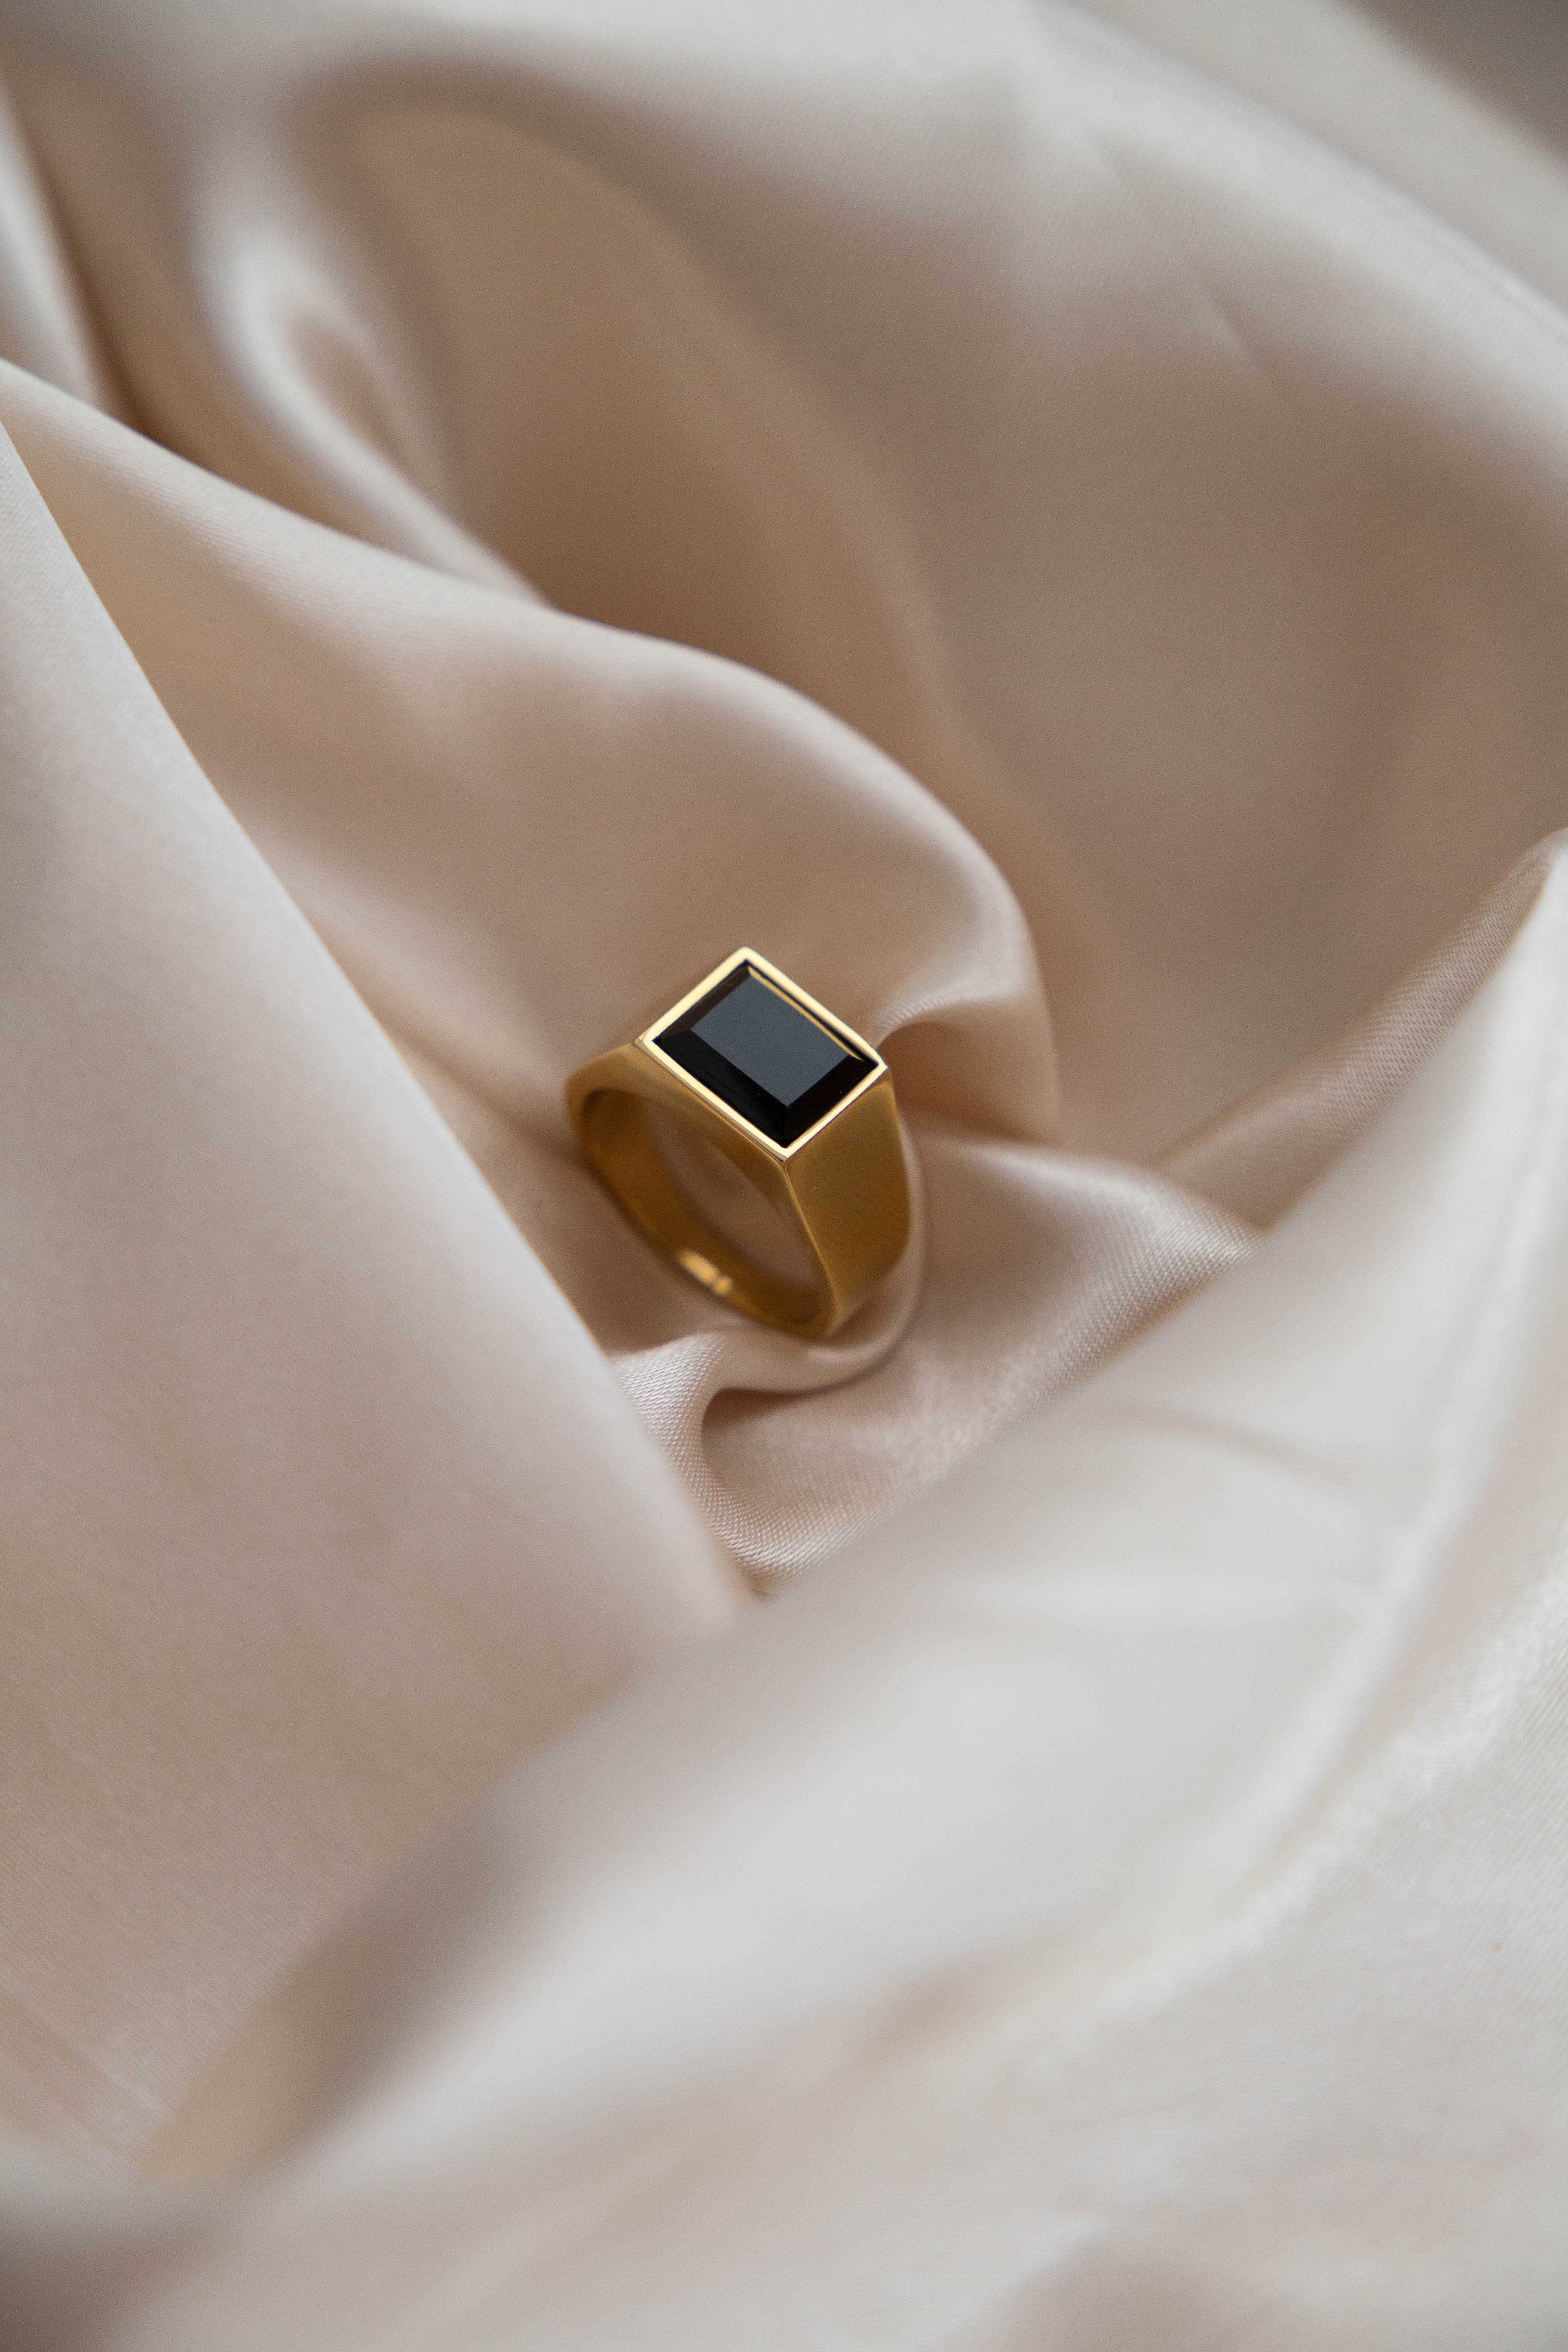 Sombre Ring - Boutique Minimaliste has waterproof, durable, elegant and vintage inspired jewelry